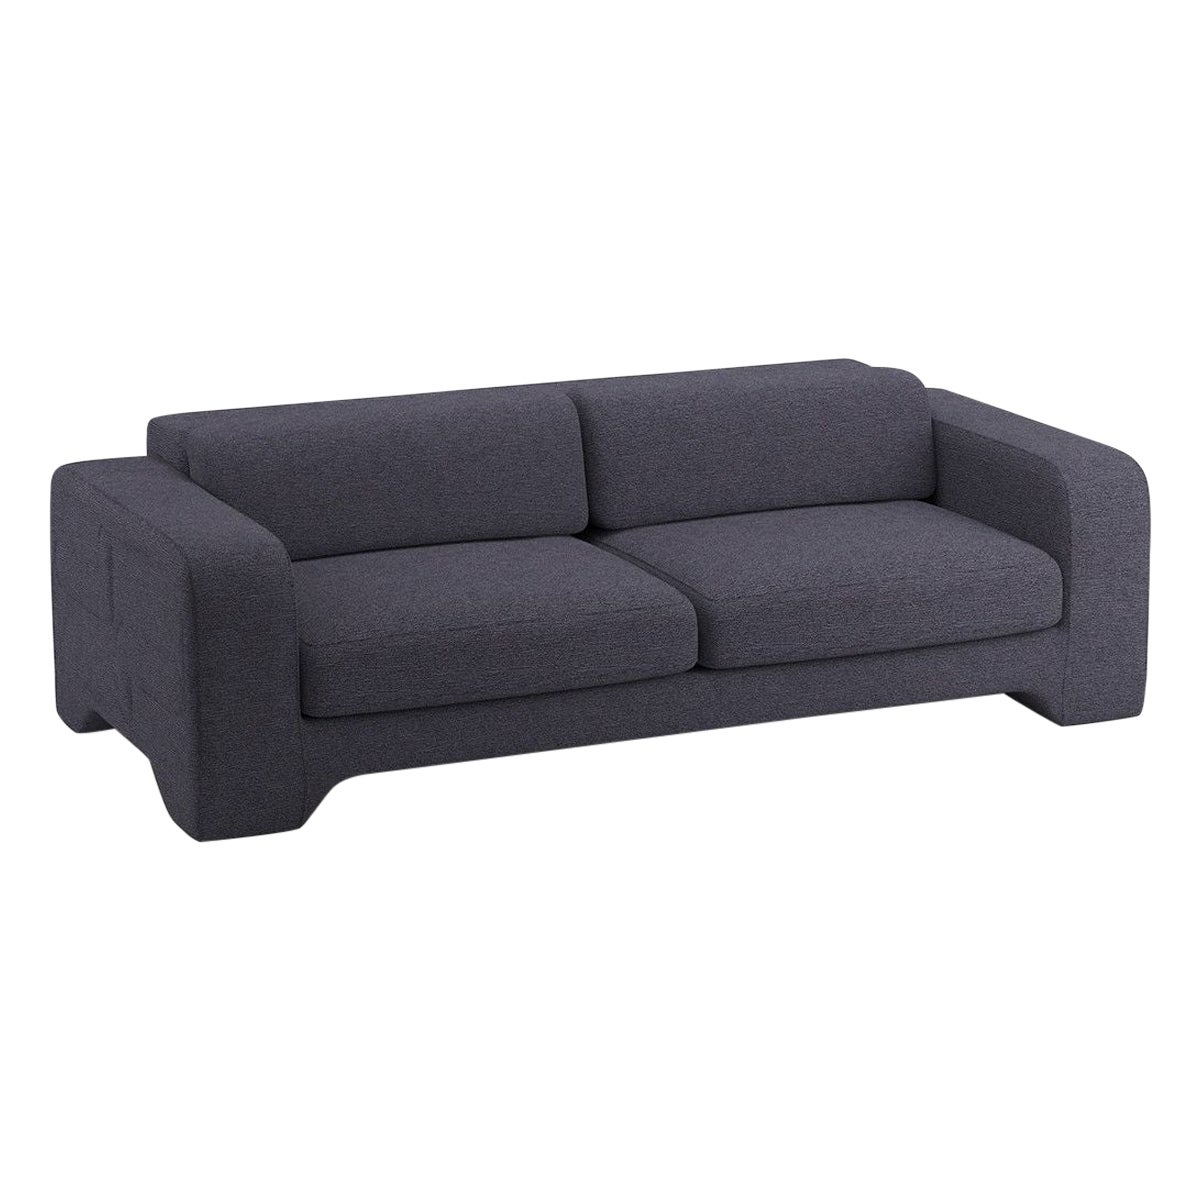 Popus Editions Giovanna 4 Seater Sofa in Anthracite Megeve Fabric Knit Effect For Sale